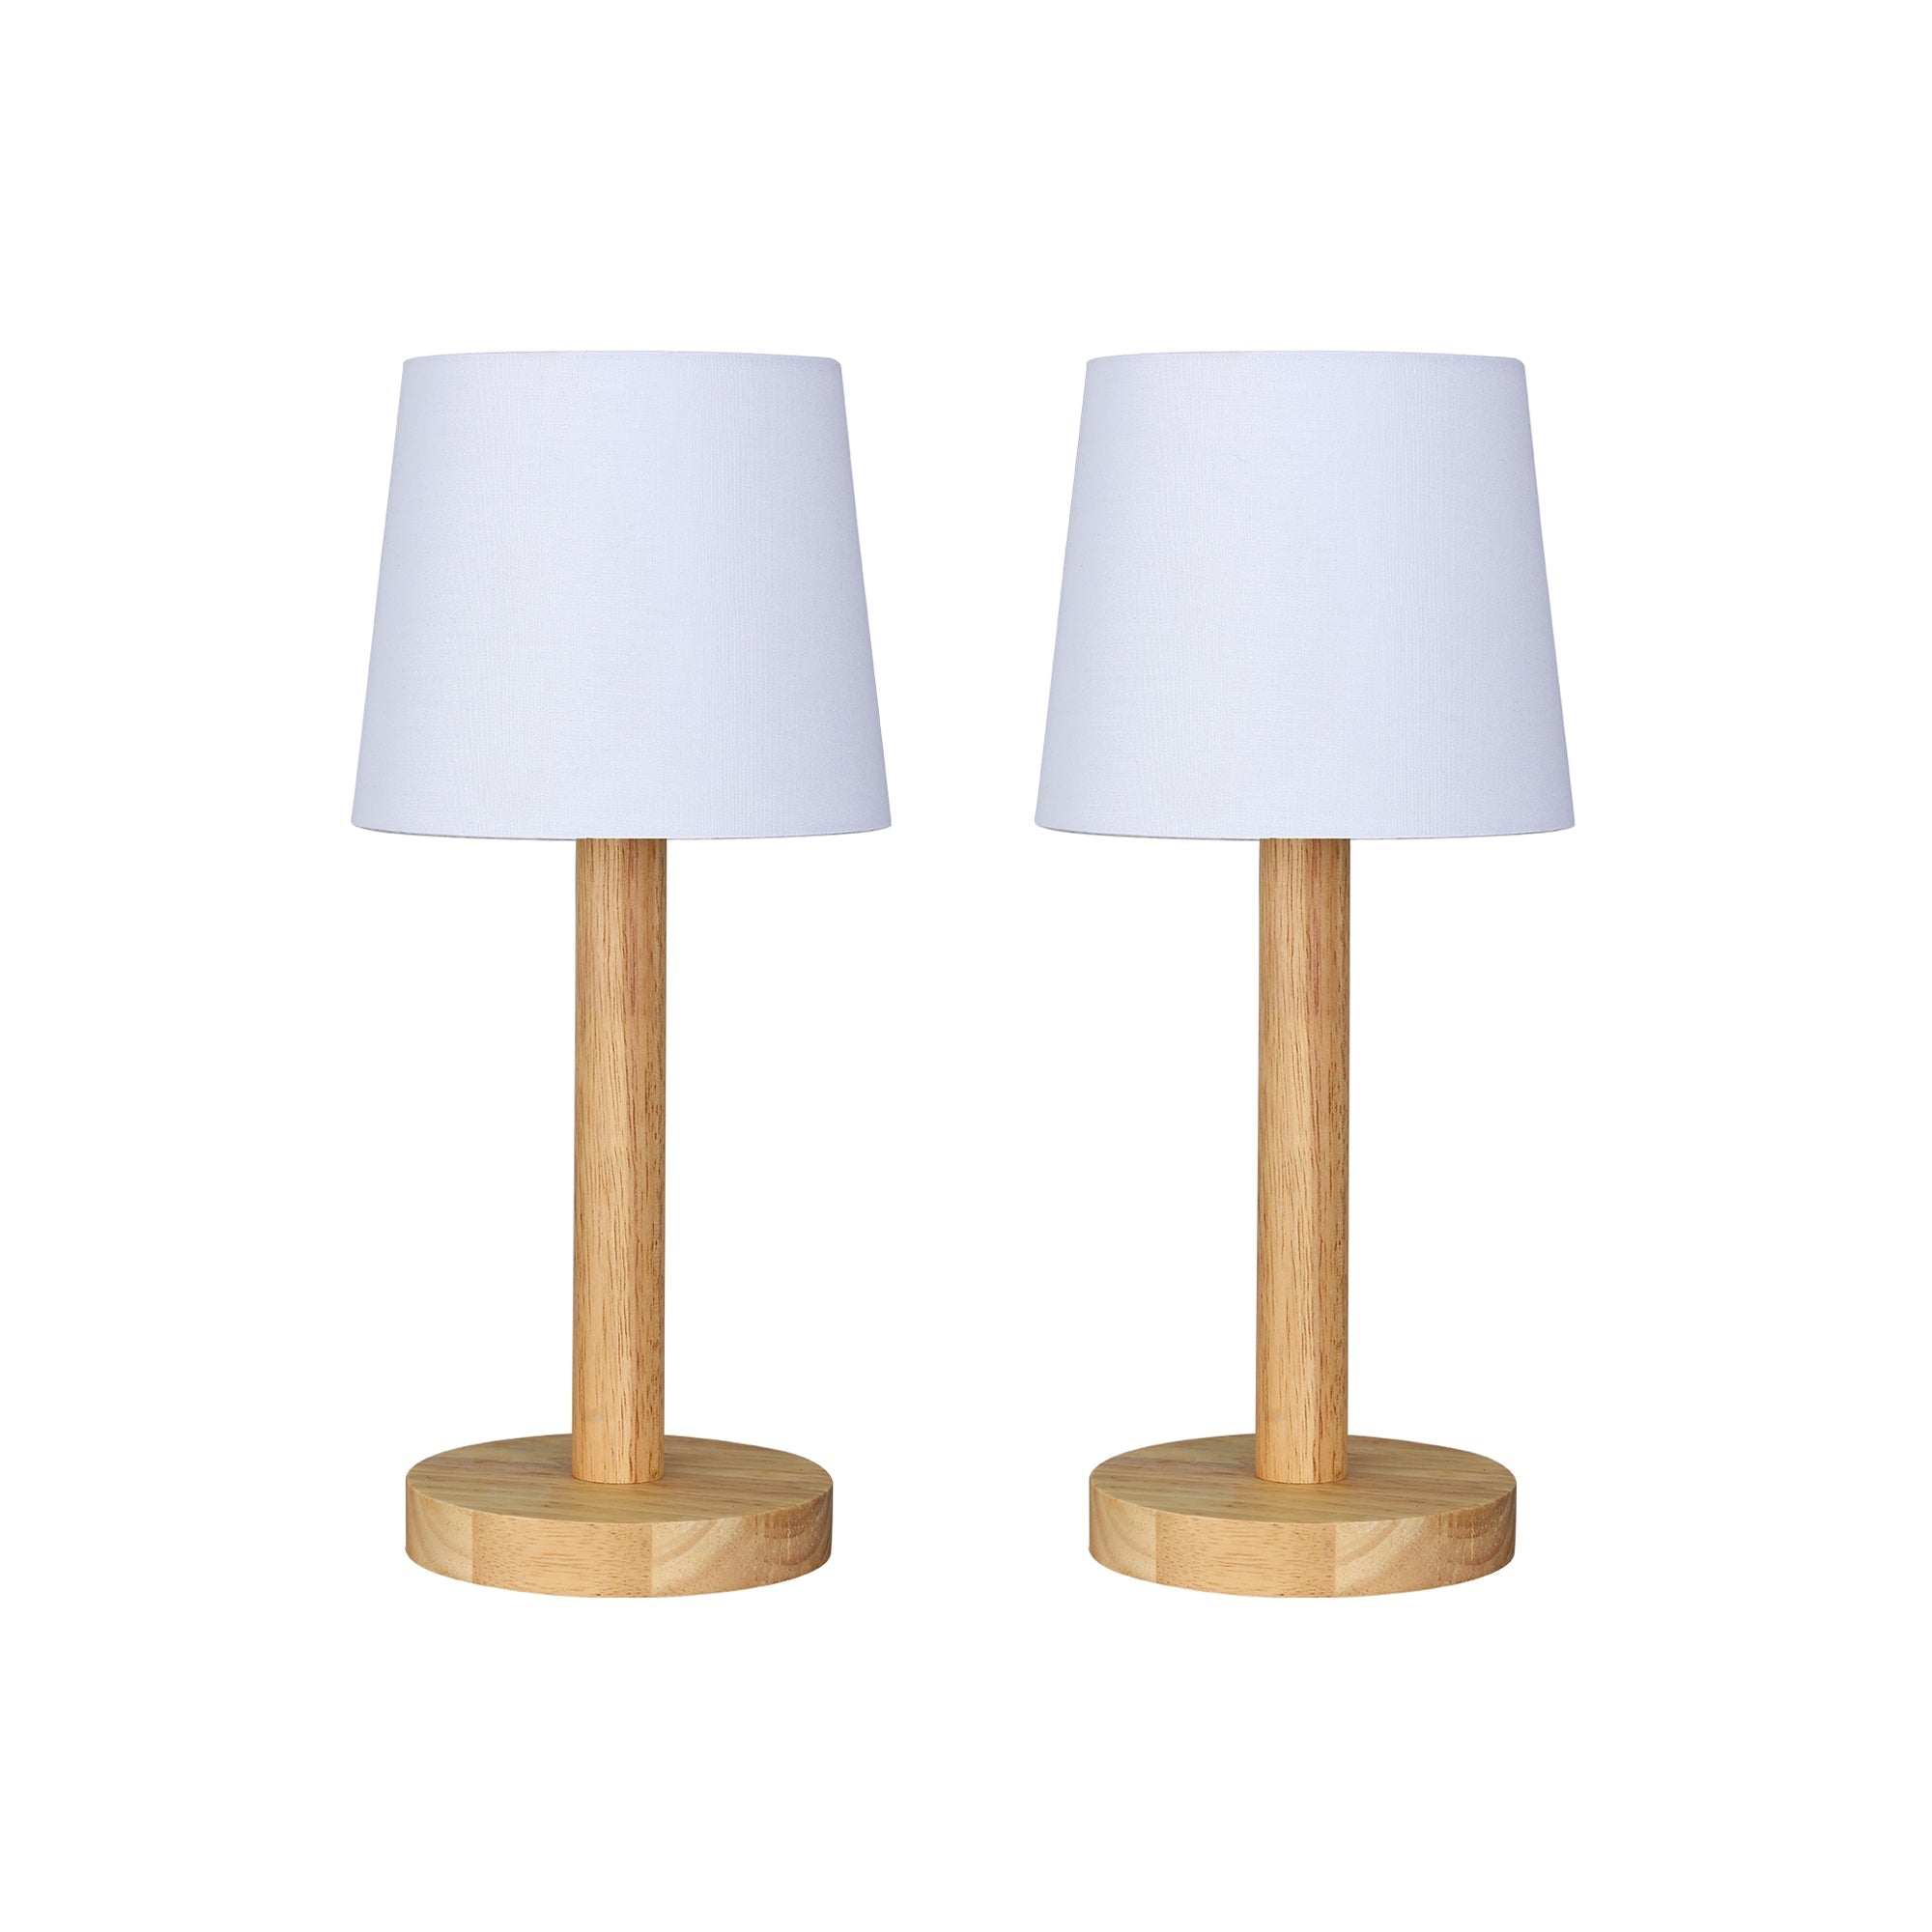 Sandy Wooden Table Lamp (Set of 2)